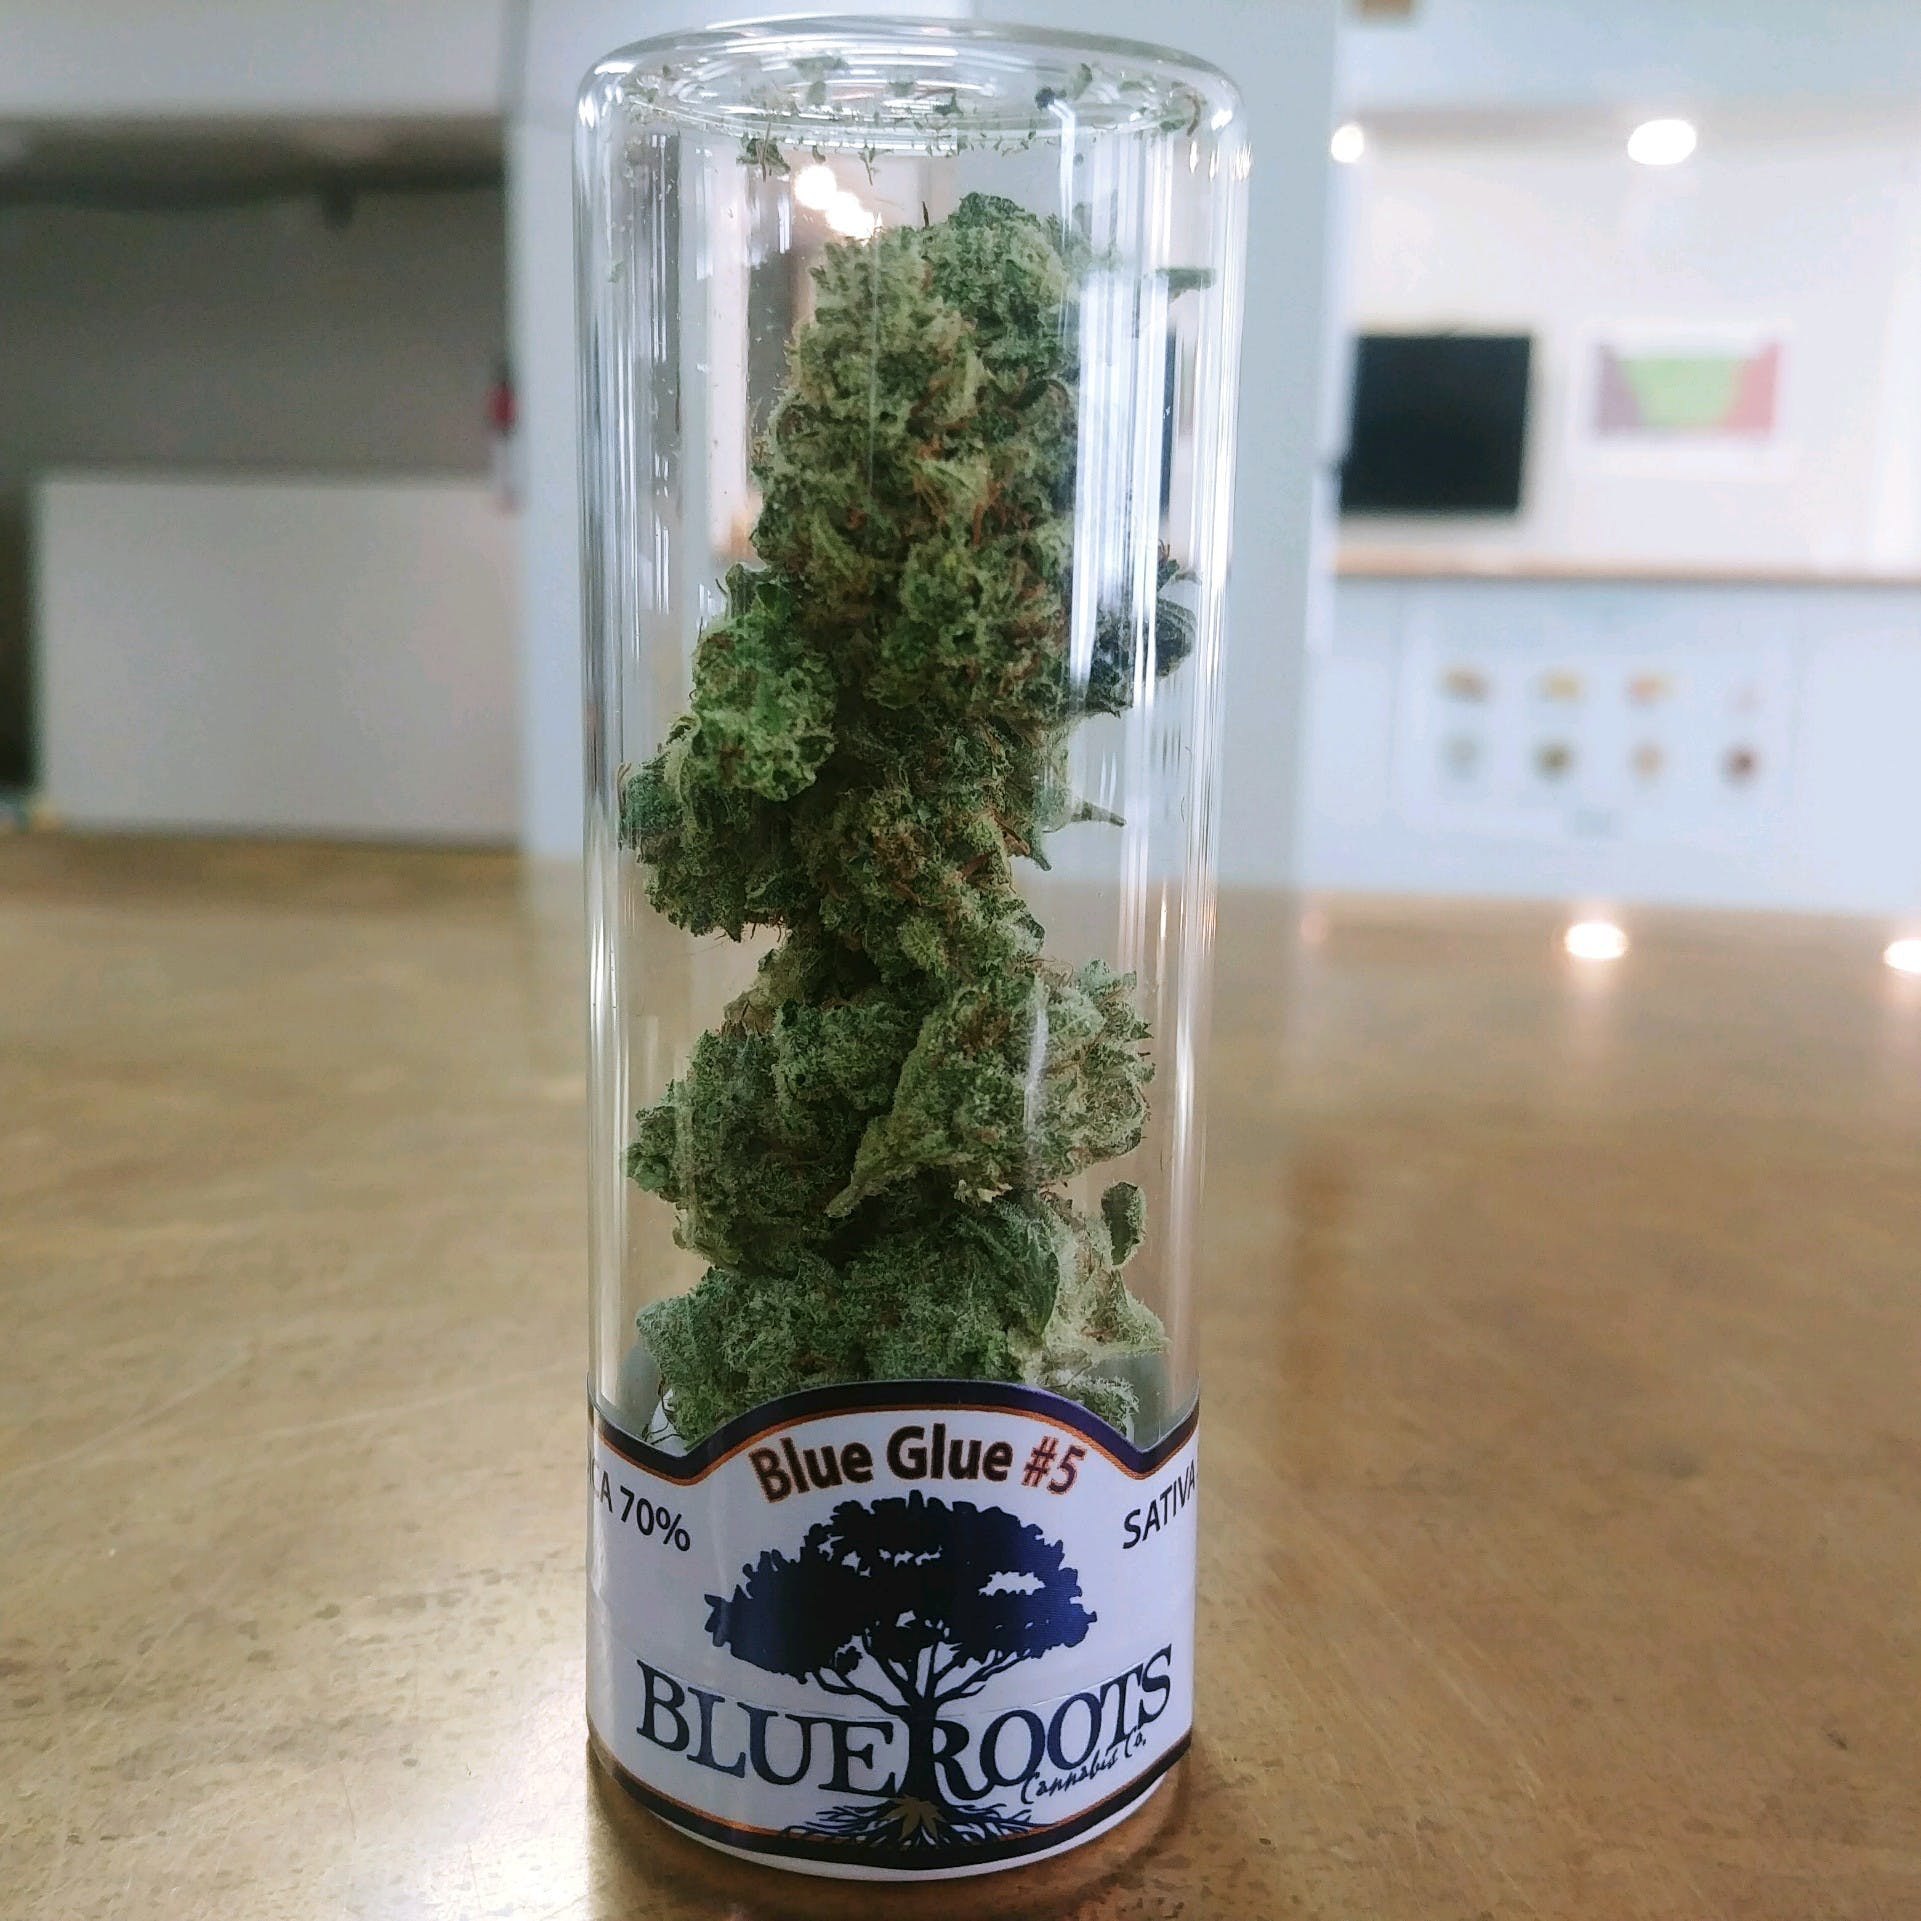 Blue Glue #5 by Blue Roots